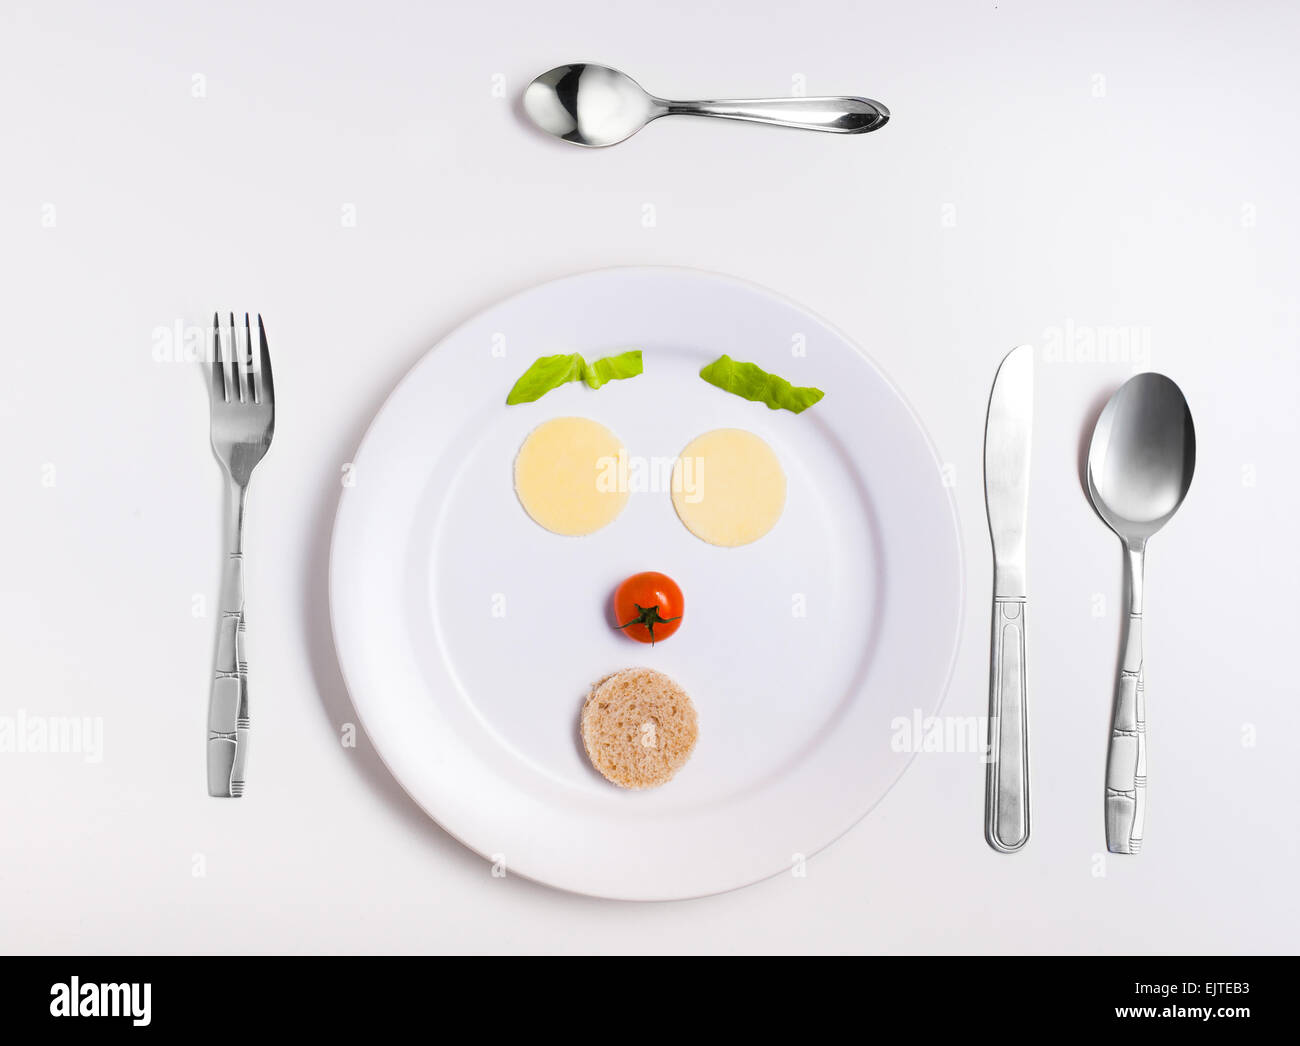 emoticon food, made from cheese, tomatoes, bread on a plate with cutlery Stock Photo